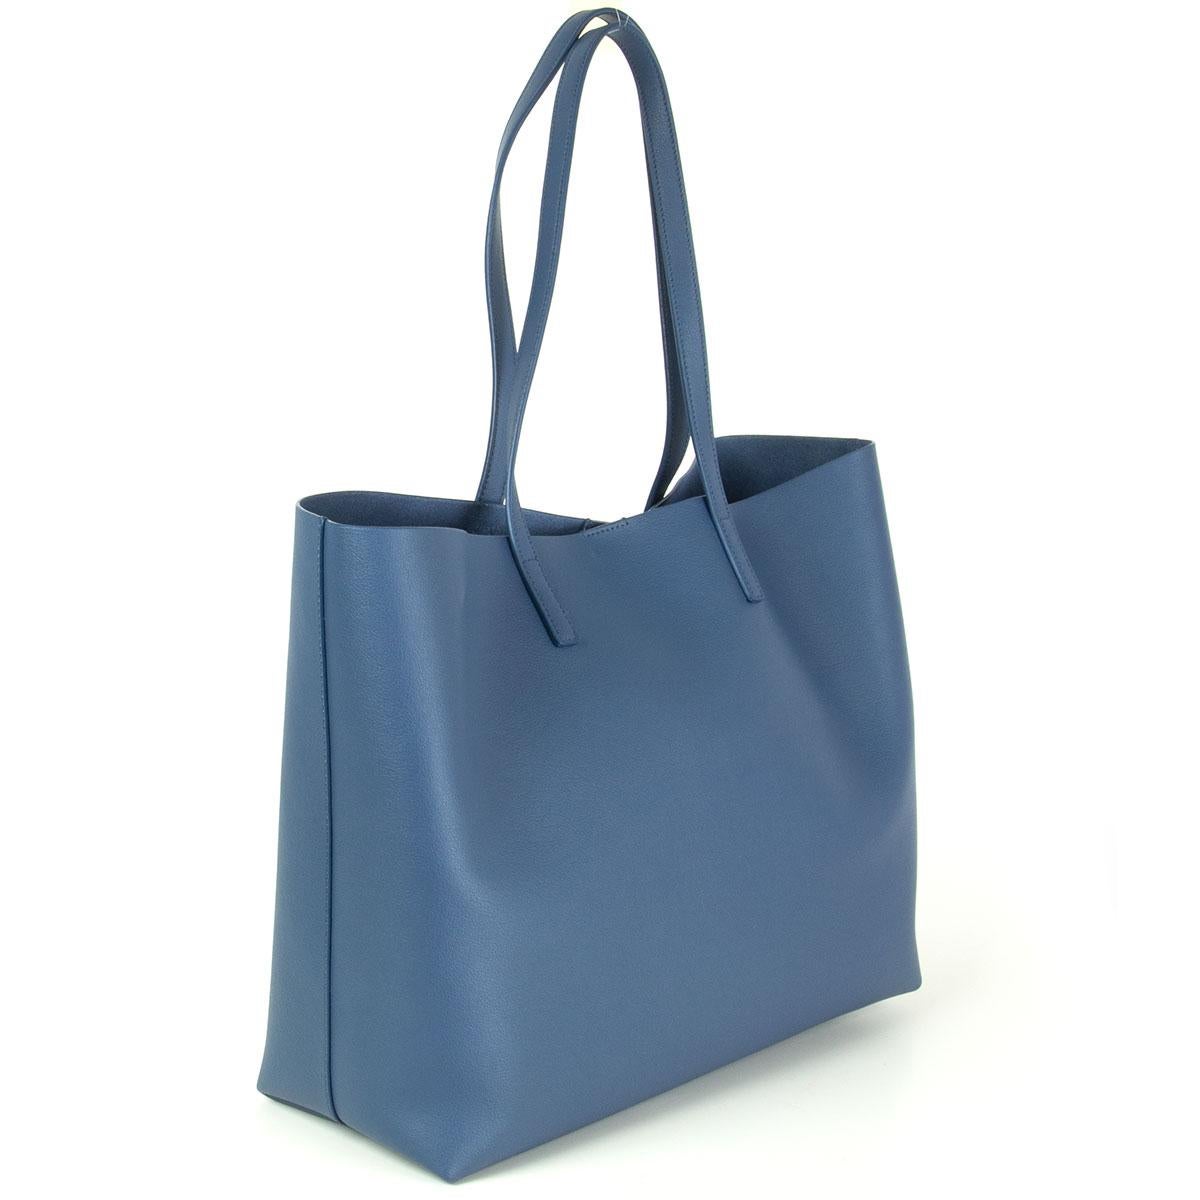 Saint Laurent large shopper tote in indigo blue calfskin. Magnetic button closure on top, unlined featuring internal zipped pouch. Has been worn once and is in virtually new condition. Comes with dust bag. 

Height 28cm (10.9in)
Width 35cm